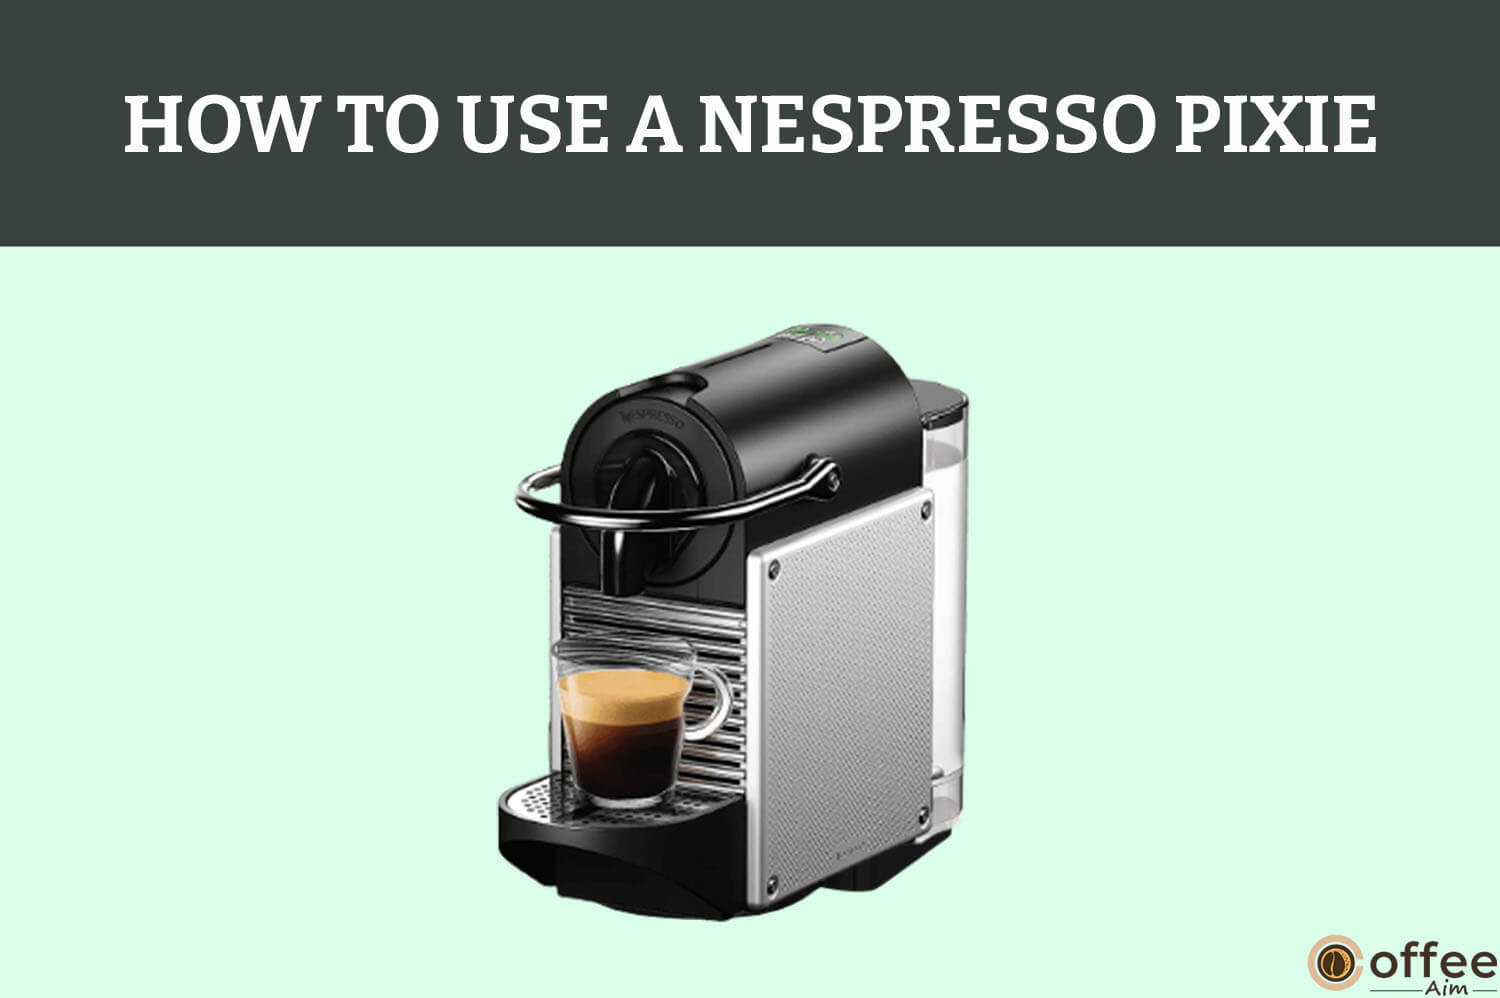 Featured image for the article "How to Use A Nespresso Pixie"